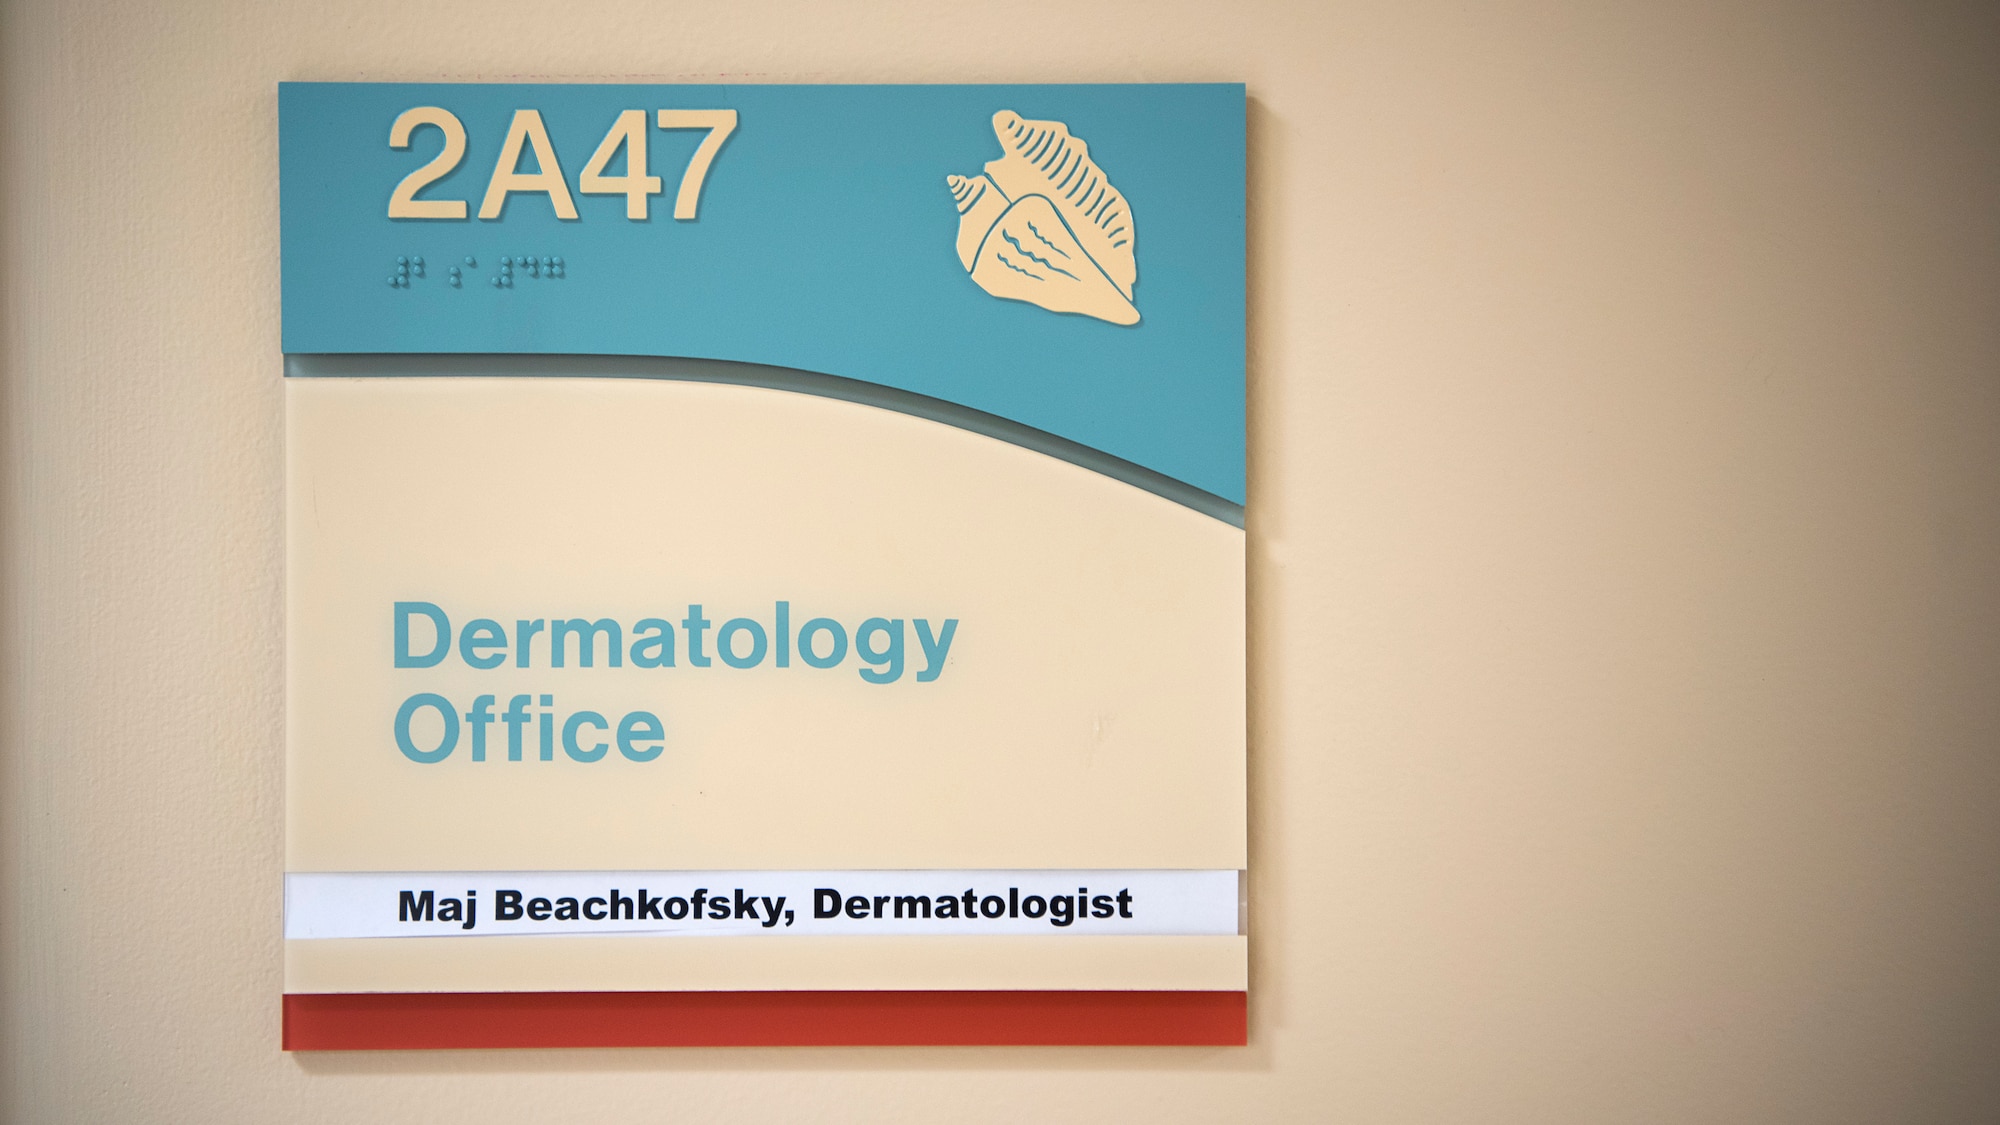 The Dermatology Office at MacDill Air Force Base, Fla., offers a variety of treatments for those who suffer from scarring as a result of blast injuries, burns, amputations, and other surgeries. Headed by Dr. Beachkofsky, the scar clinic utilizes cutting edge laser technologies to improve scar tissue.